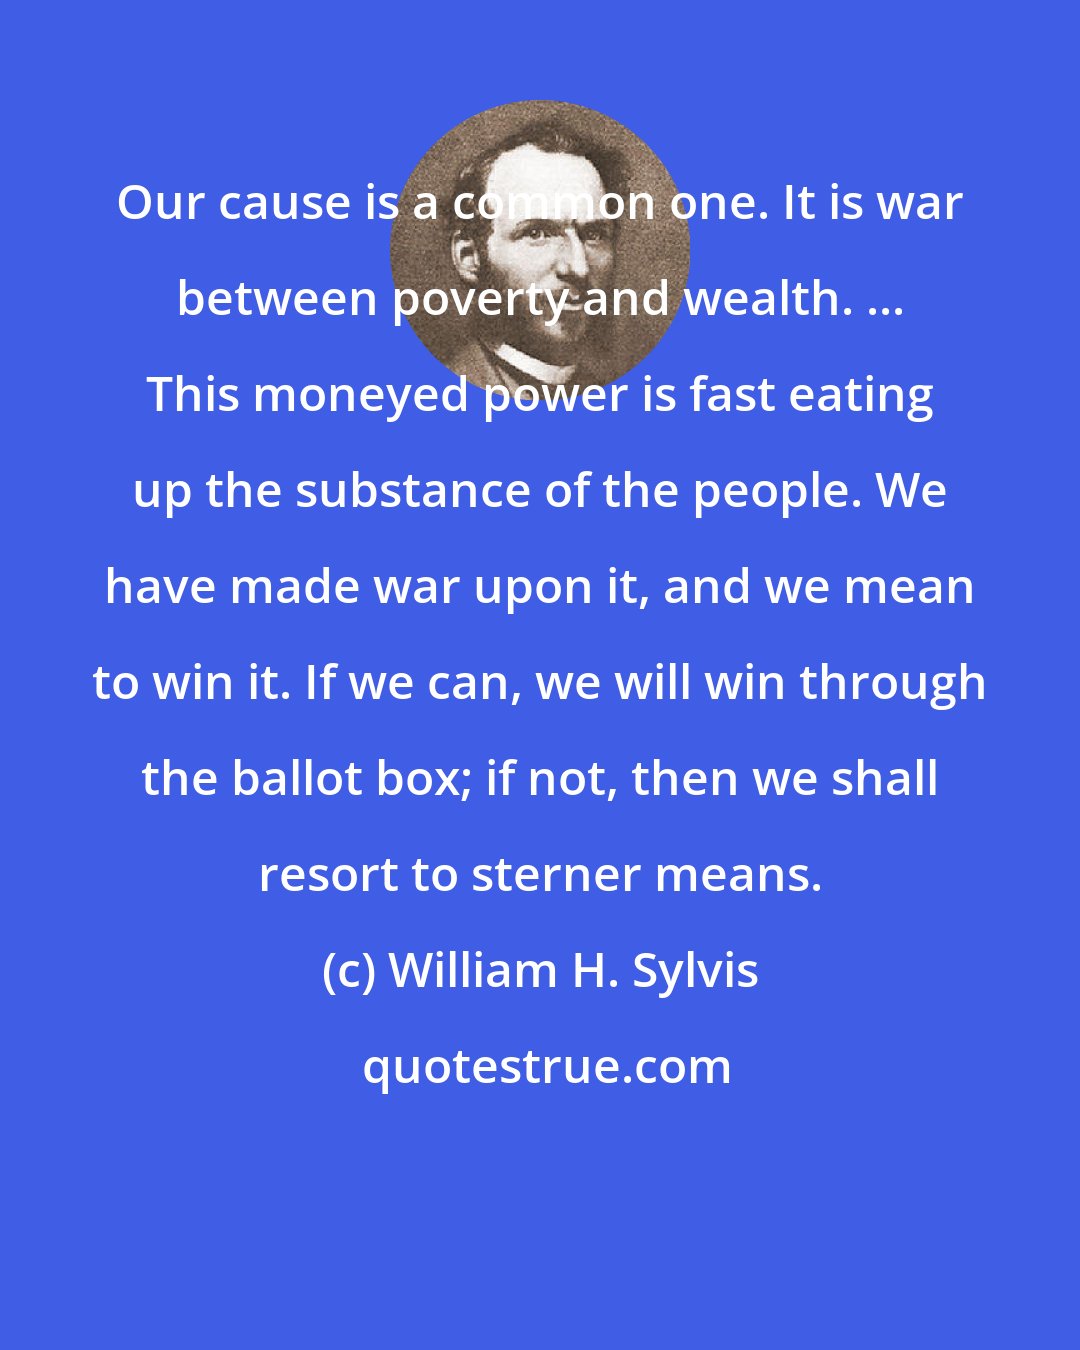 William H. Sylvis: Our cause is a common one. It is war between poverty and wealth. ... This moneyed power is fast eating up the substance of the people. We have made war upon it, and we mean to win it. If we can, we will win through the ballot box; if not, then we shall resort to sterner means.